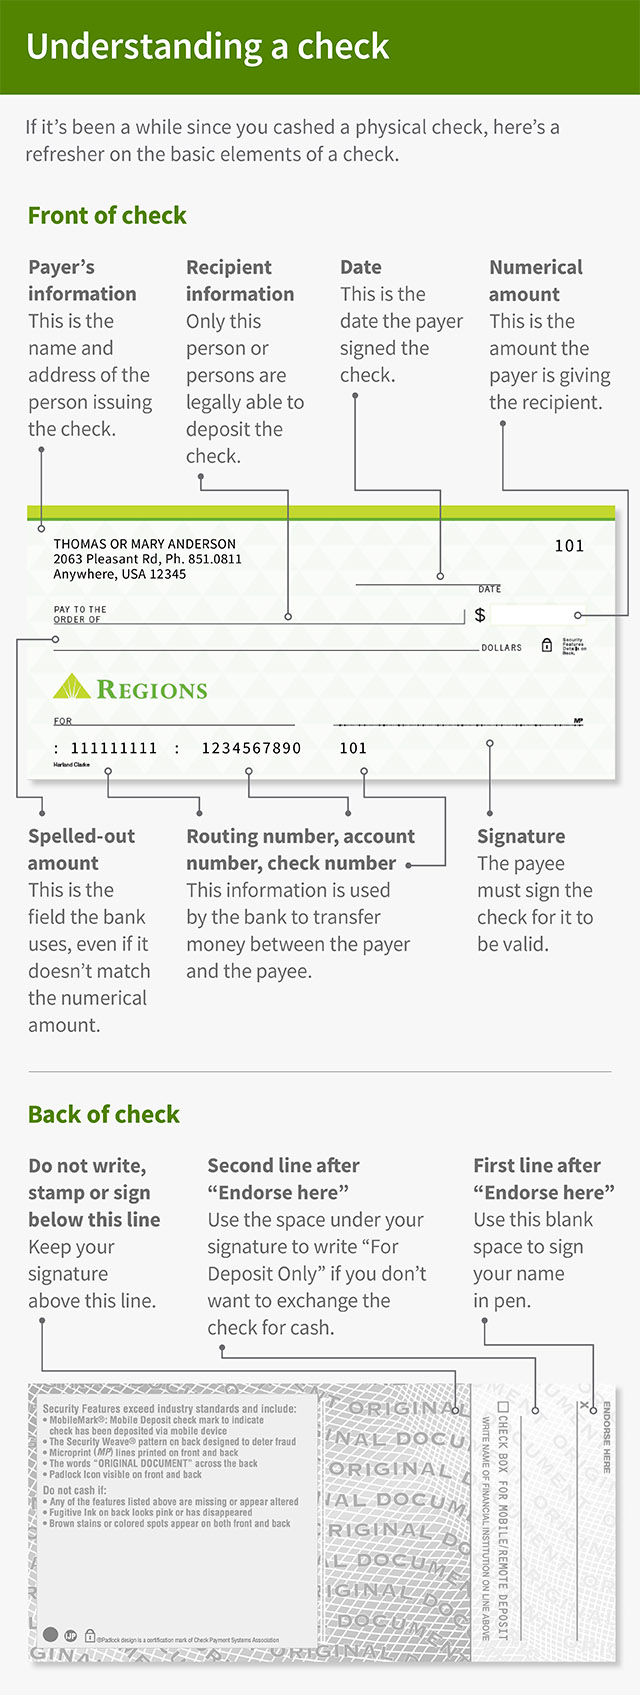 This graphic is titled, “Understanding a check.” There is an introduction that reads, “If it’s been a while since you cashed a physical check, here’s a refresher on the basic elements of a check.” The front and back of a check are annotated. On the front of the check is: “Payer’s information: This is the name and address of the person issuing the check. Date: This can be the date the payer signed the check. Recipient information: Only this person or persons are legally able to deposit the check. Numerical amount: This is the amount the payer is giving the recipient. Spelled-out amount: This is the field the bank uses, even if it doesn’t match the numerical amount. Signature: The payee must sign the check for it to be valid. Check number, routing number, account number: This information is used by the bank to transfer money between the payer and the payee.” On the back of the check is: “First line after “Endorse here”: Use this blank space to sign your name in pen. Second line after “Endorse here”: Use the space under your signature to write “For Deposit Only” if you don’t want to exchange the check for cash. “Do Not Write, Stamp or Sign Below This Line”: Keep your signature above this line.”